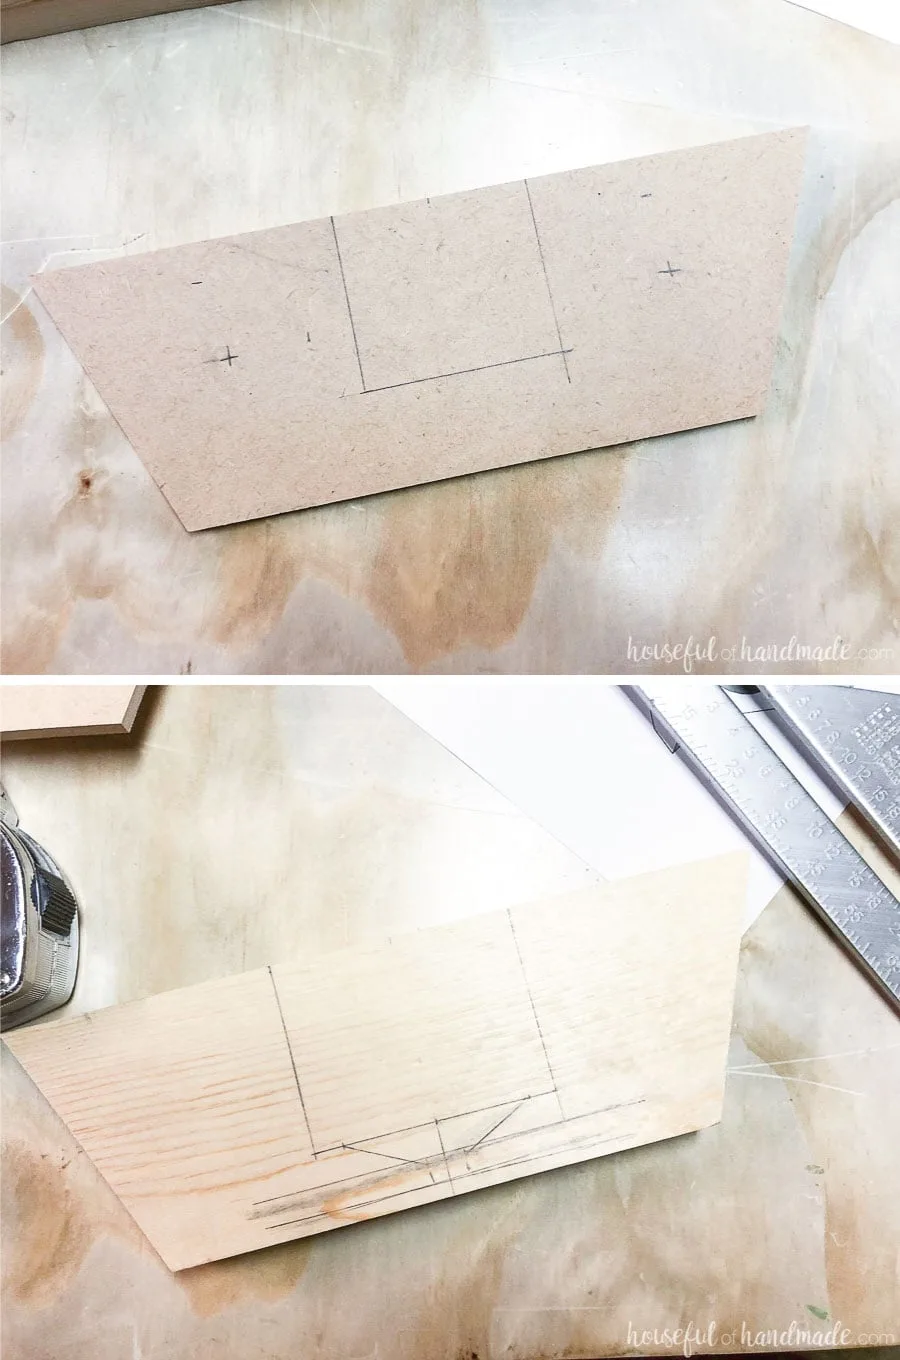 Marking the position of the cutting and drilling for the DIY phone speaker.